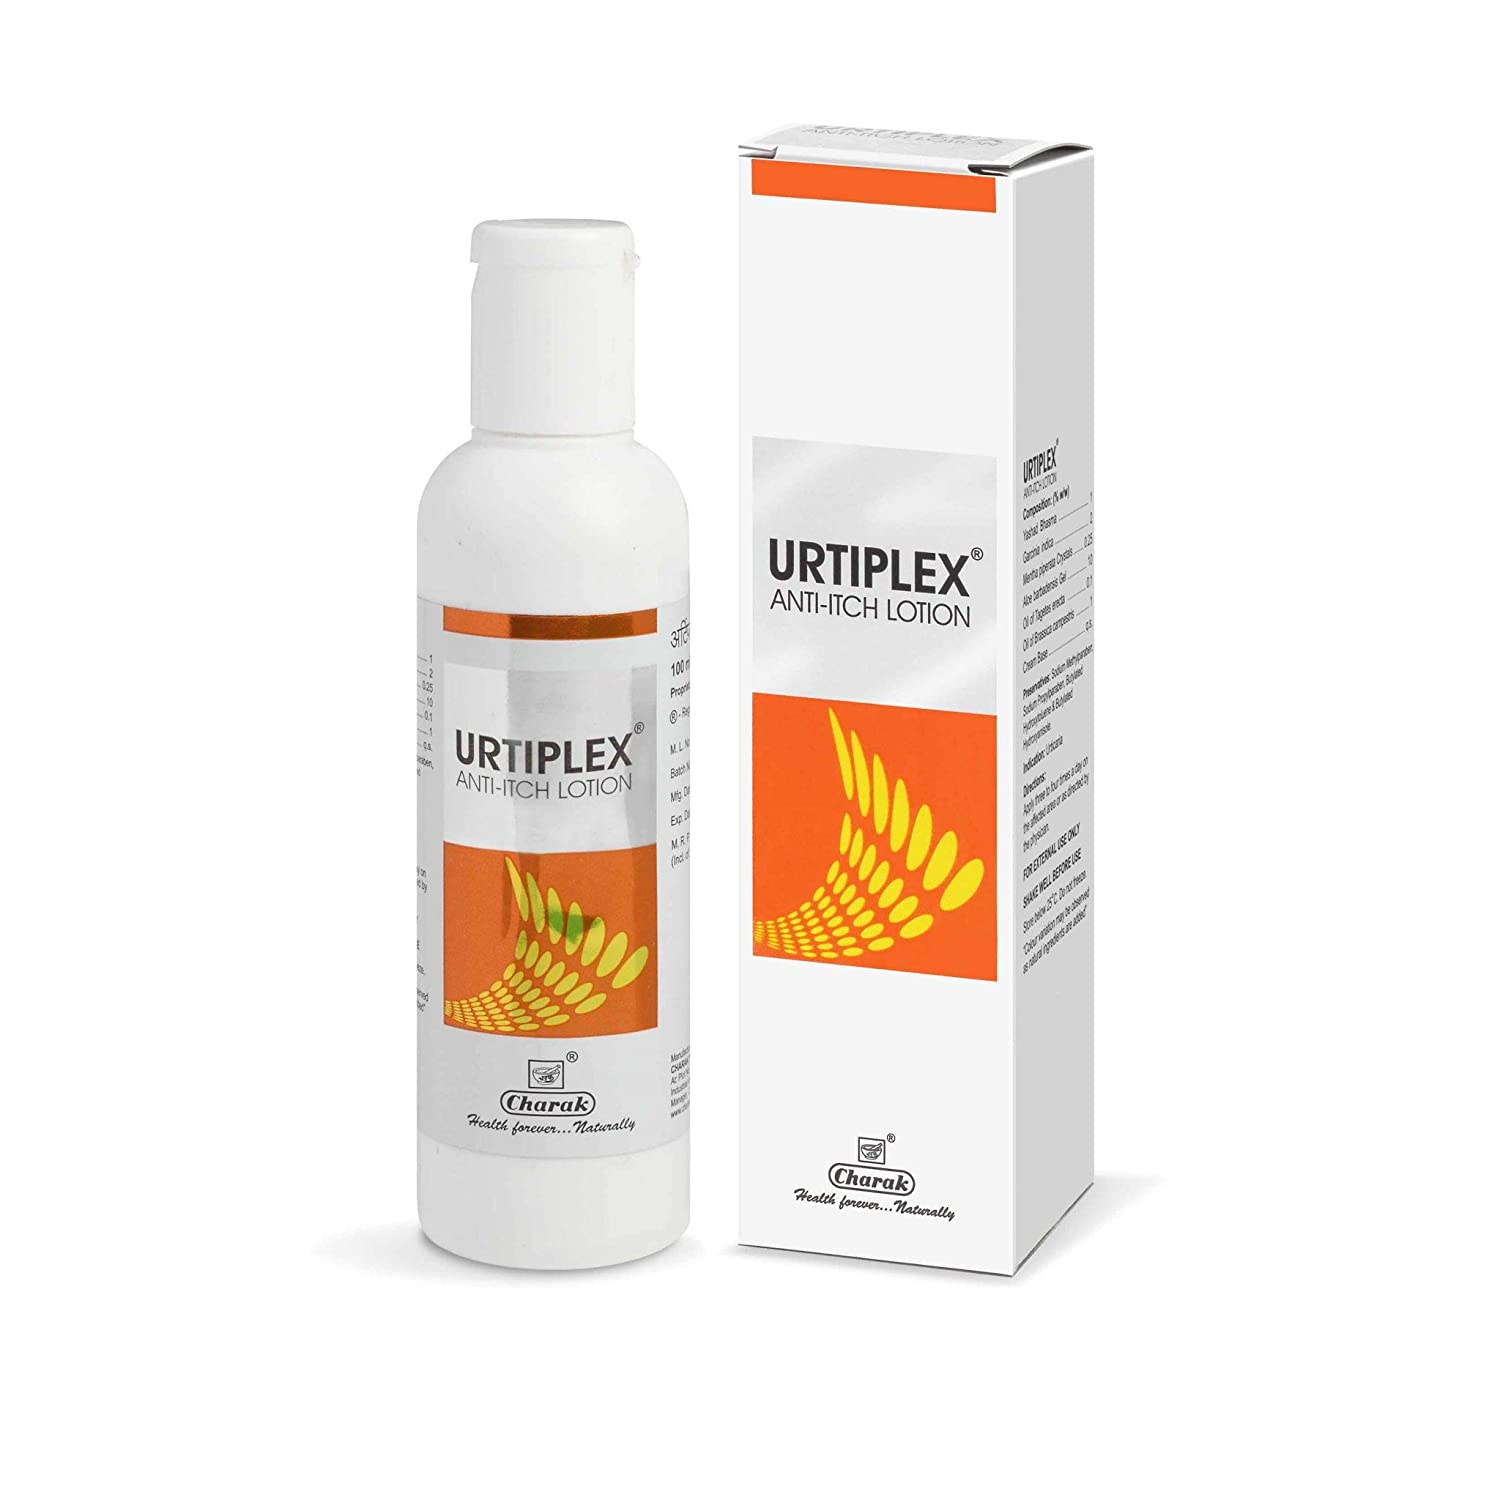 Shop Urtiplex Lotion 100ml at price 147.00 from Charak Online - Ayush Care